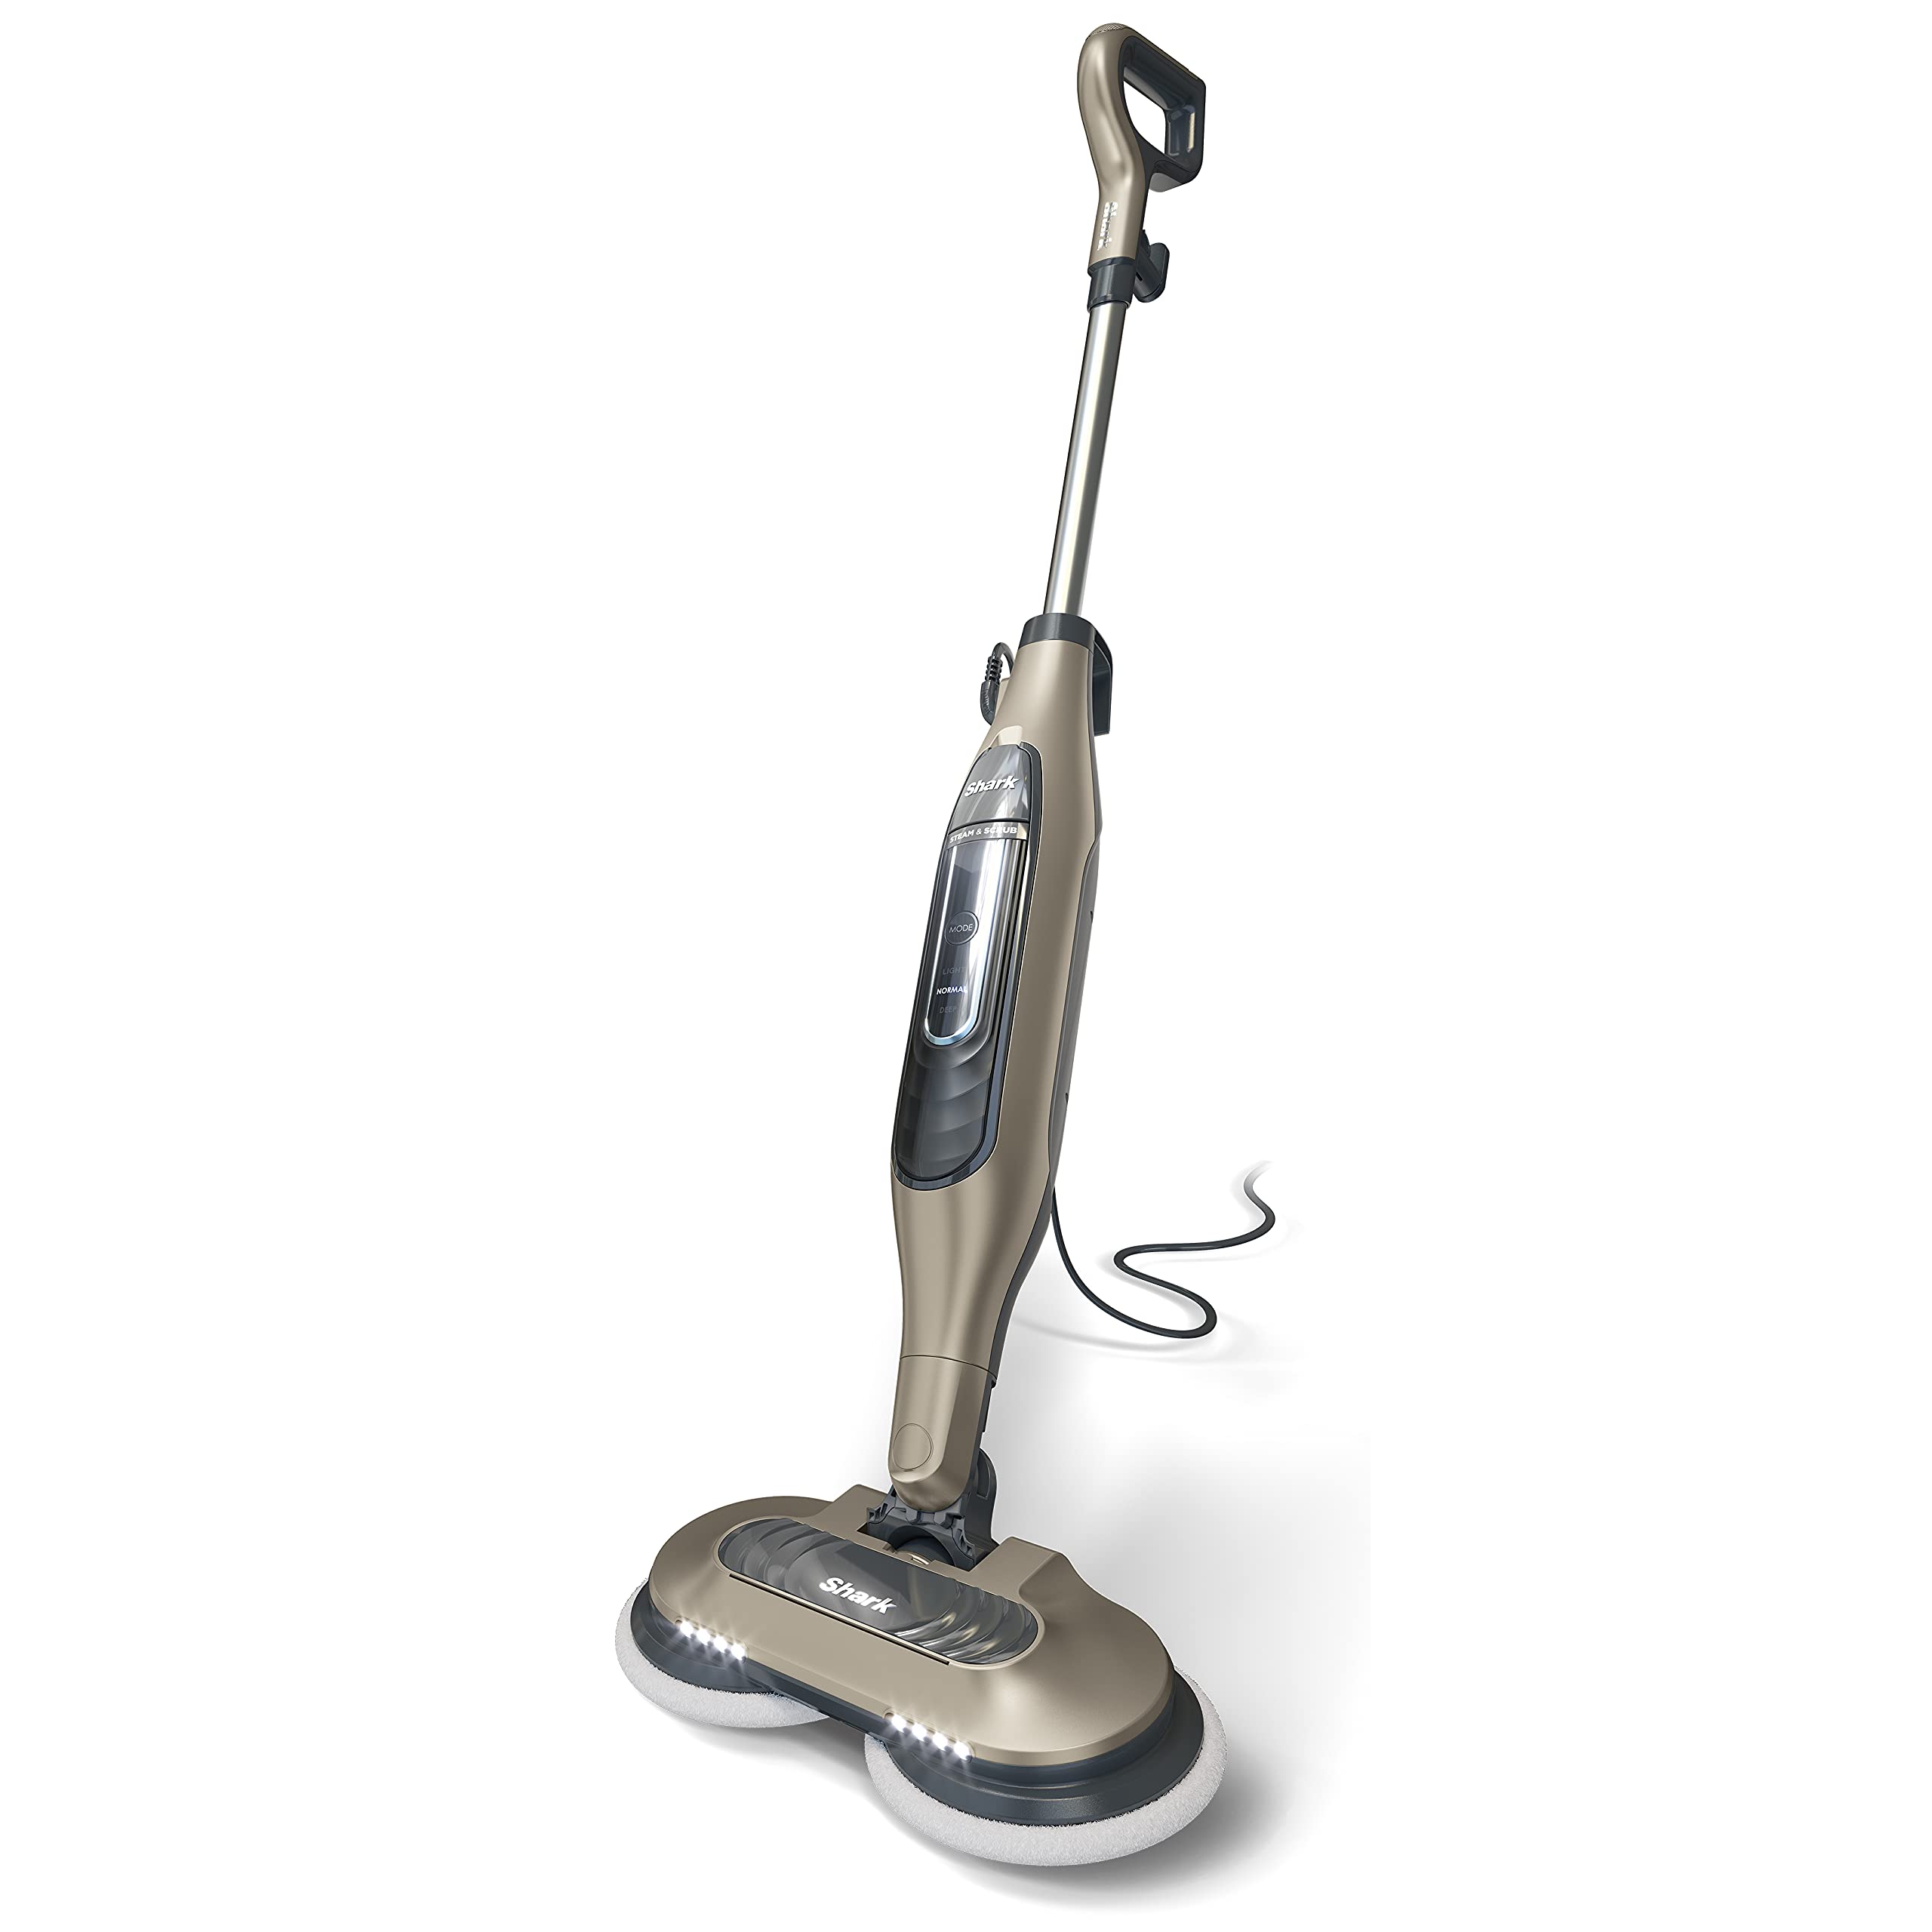 Shark Steam & Scrub All-in-One Scrubbing & Sanitizing Mop (S7001, Gold) $73 + Free Shipping